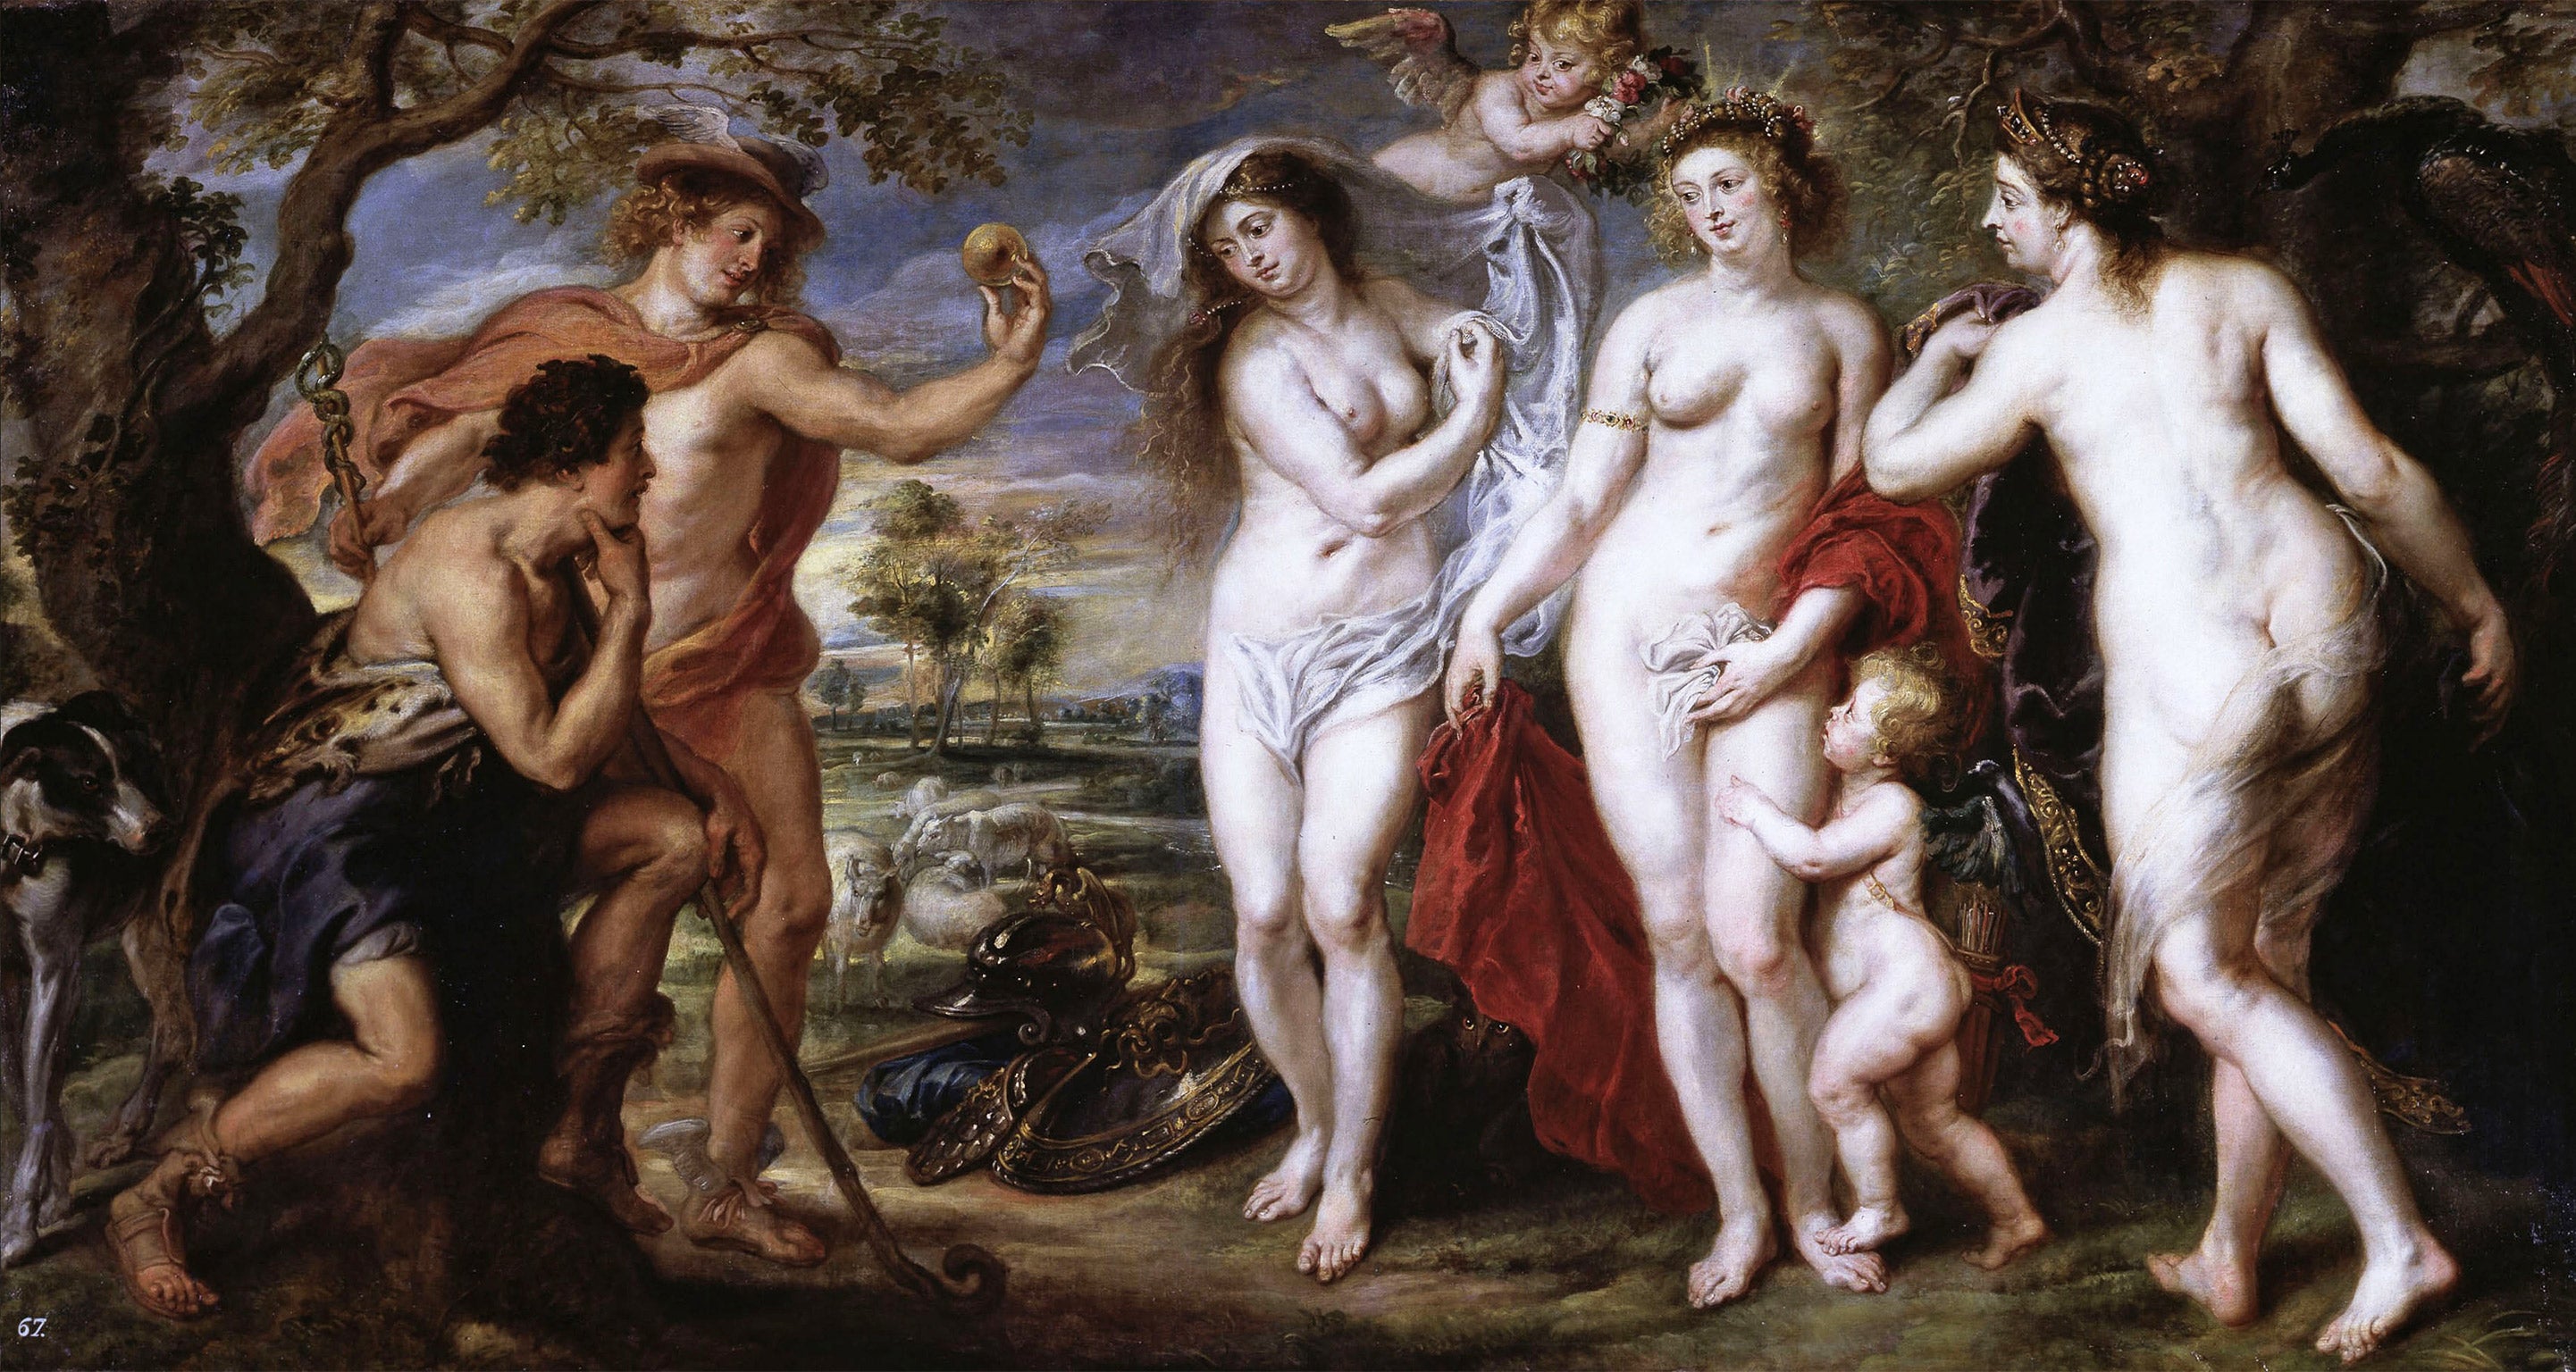 Jealous guys: ‘The Judgement of Paris’ is based on jealousy and envy